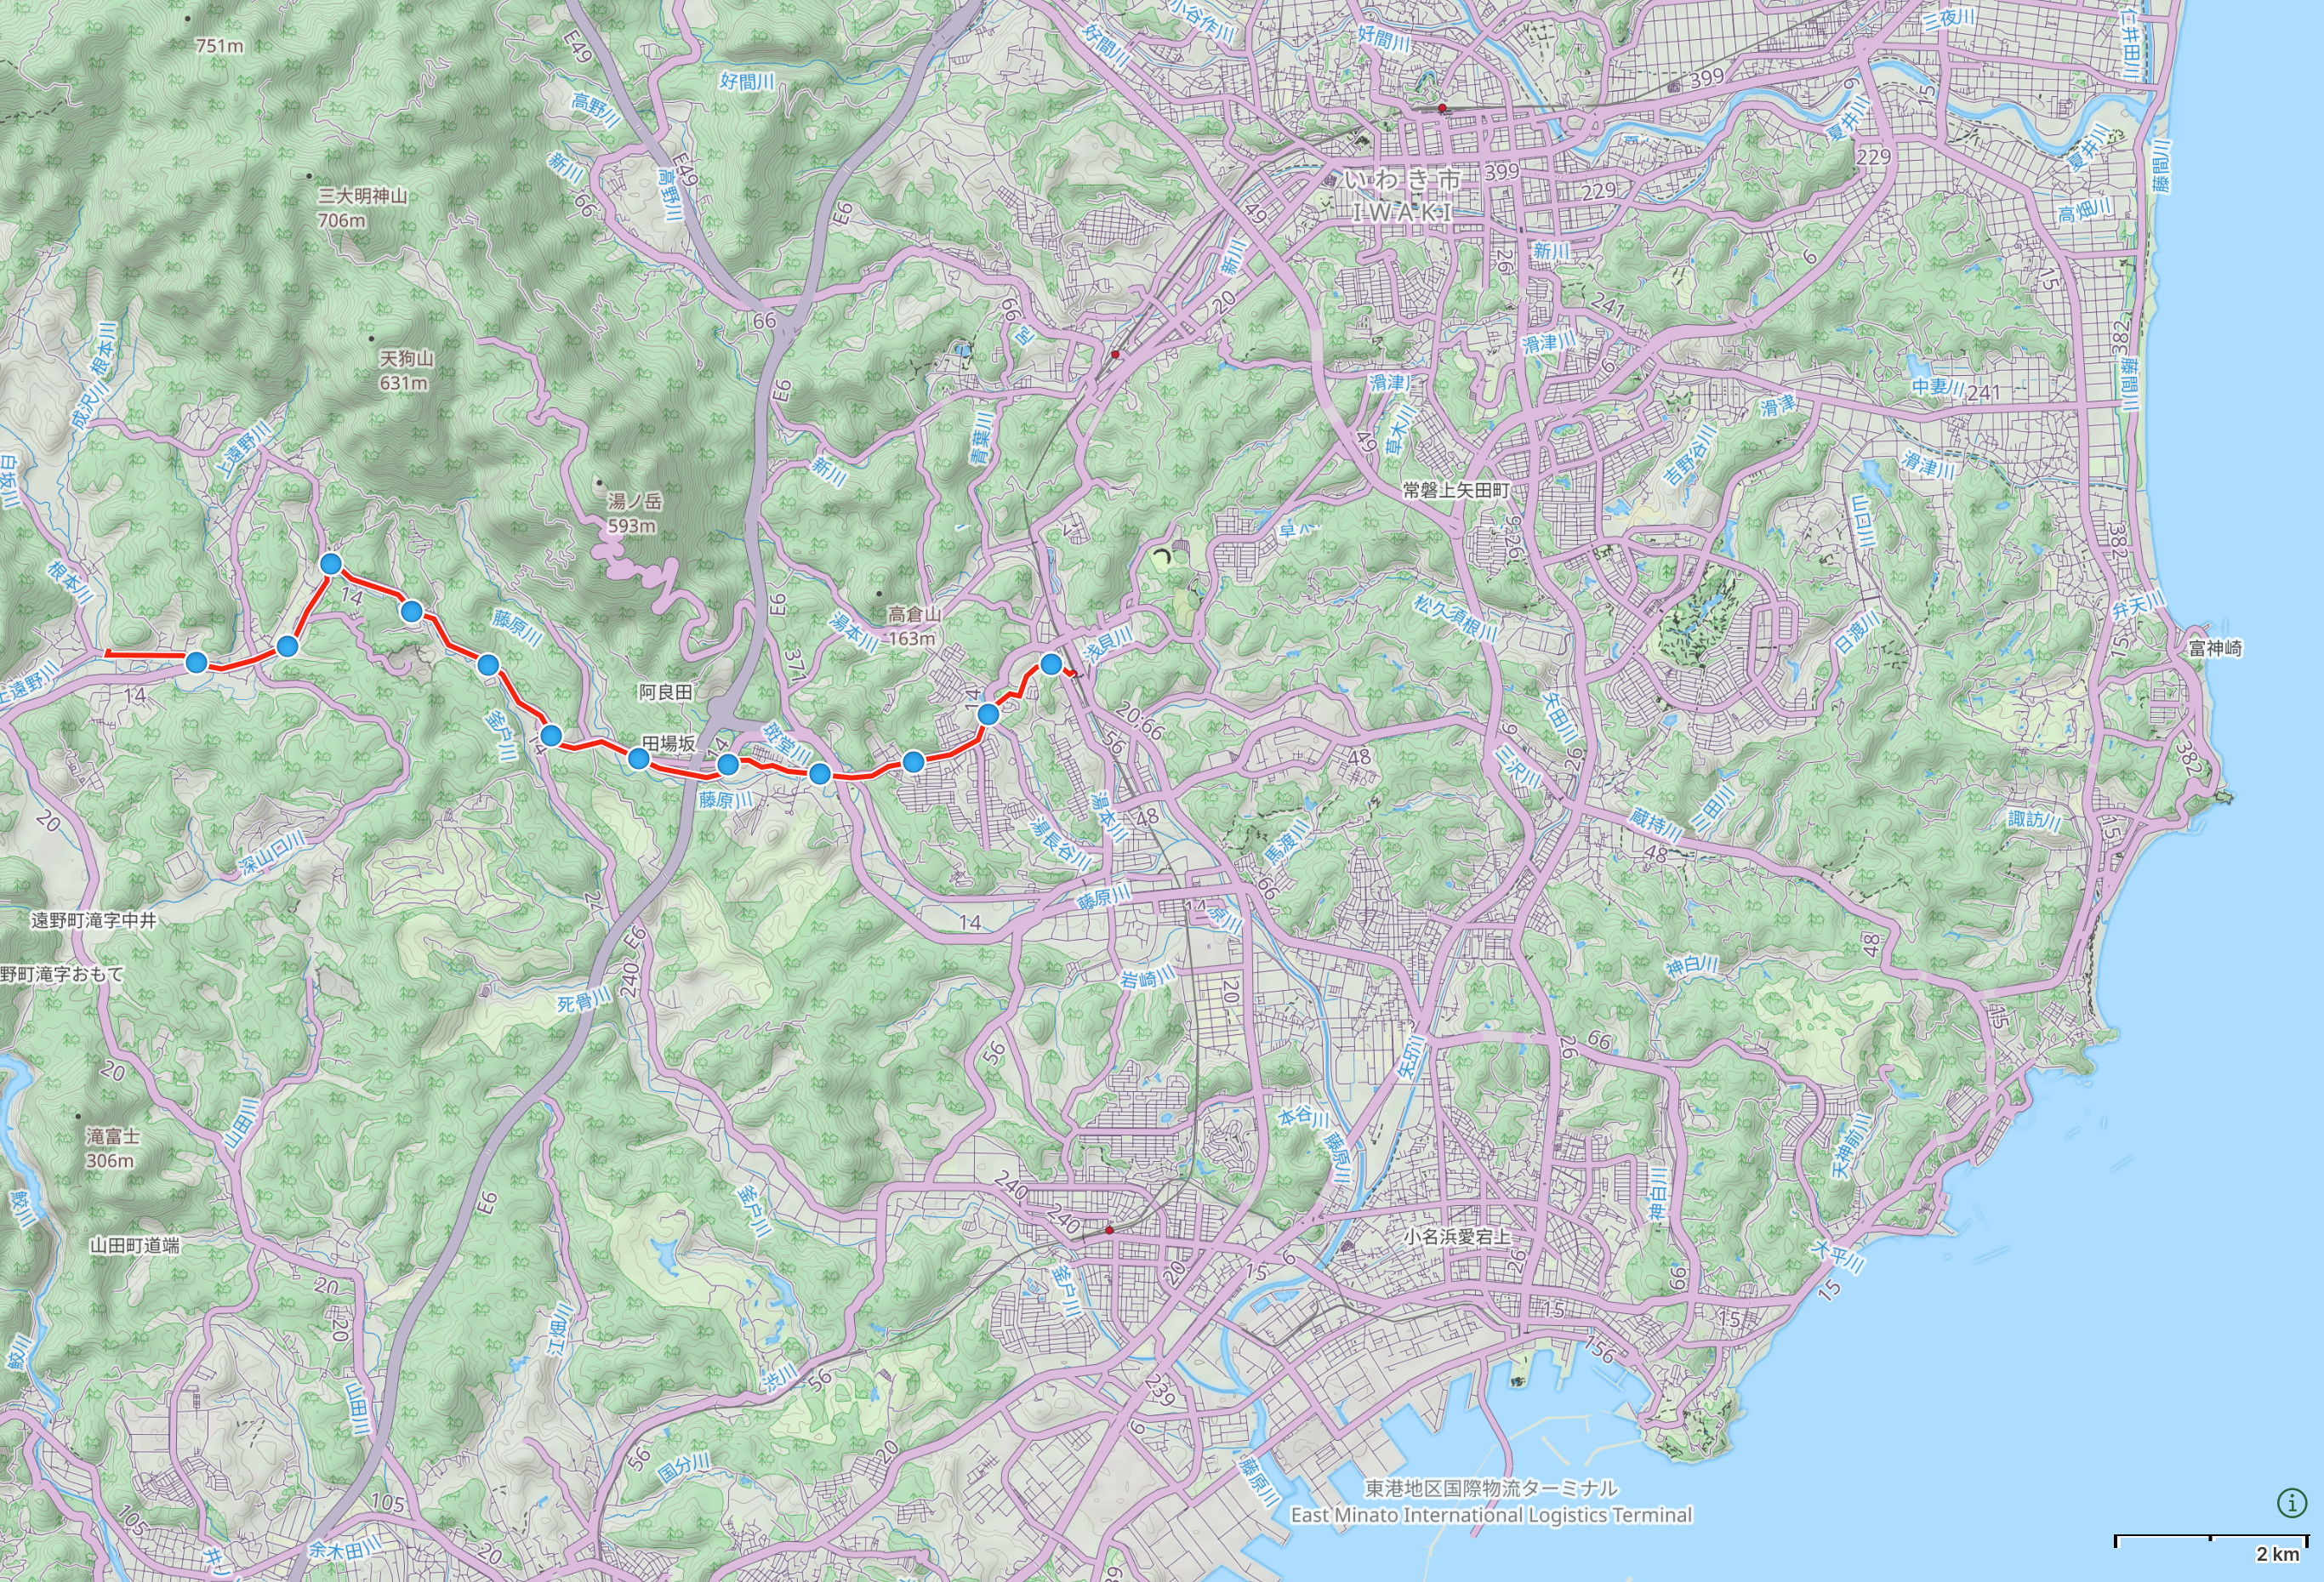 Map of Fukushima with author’s route from Tōno to Iwaki highlighted.